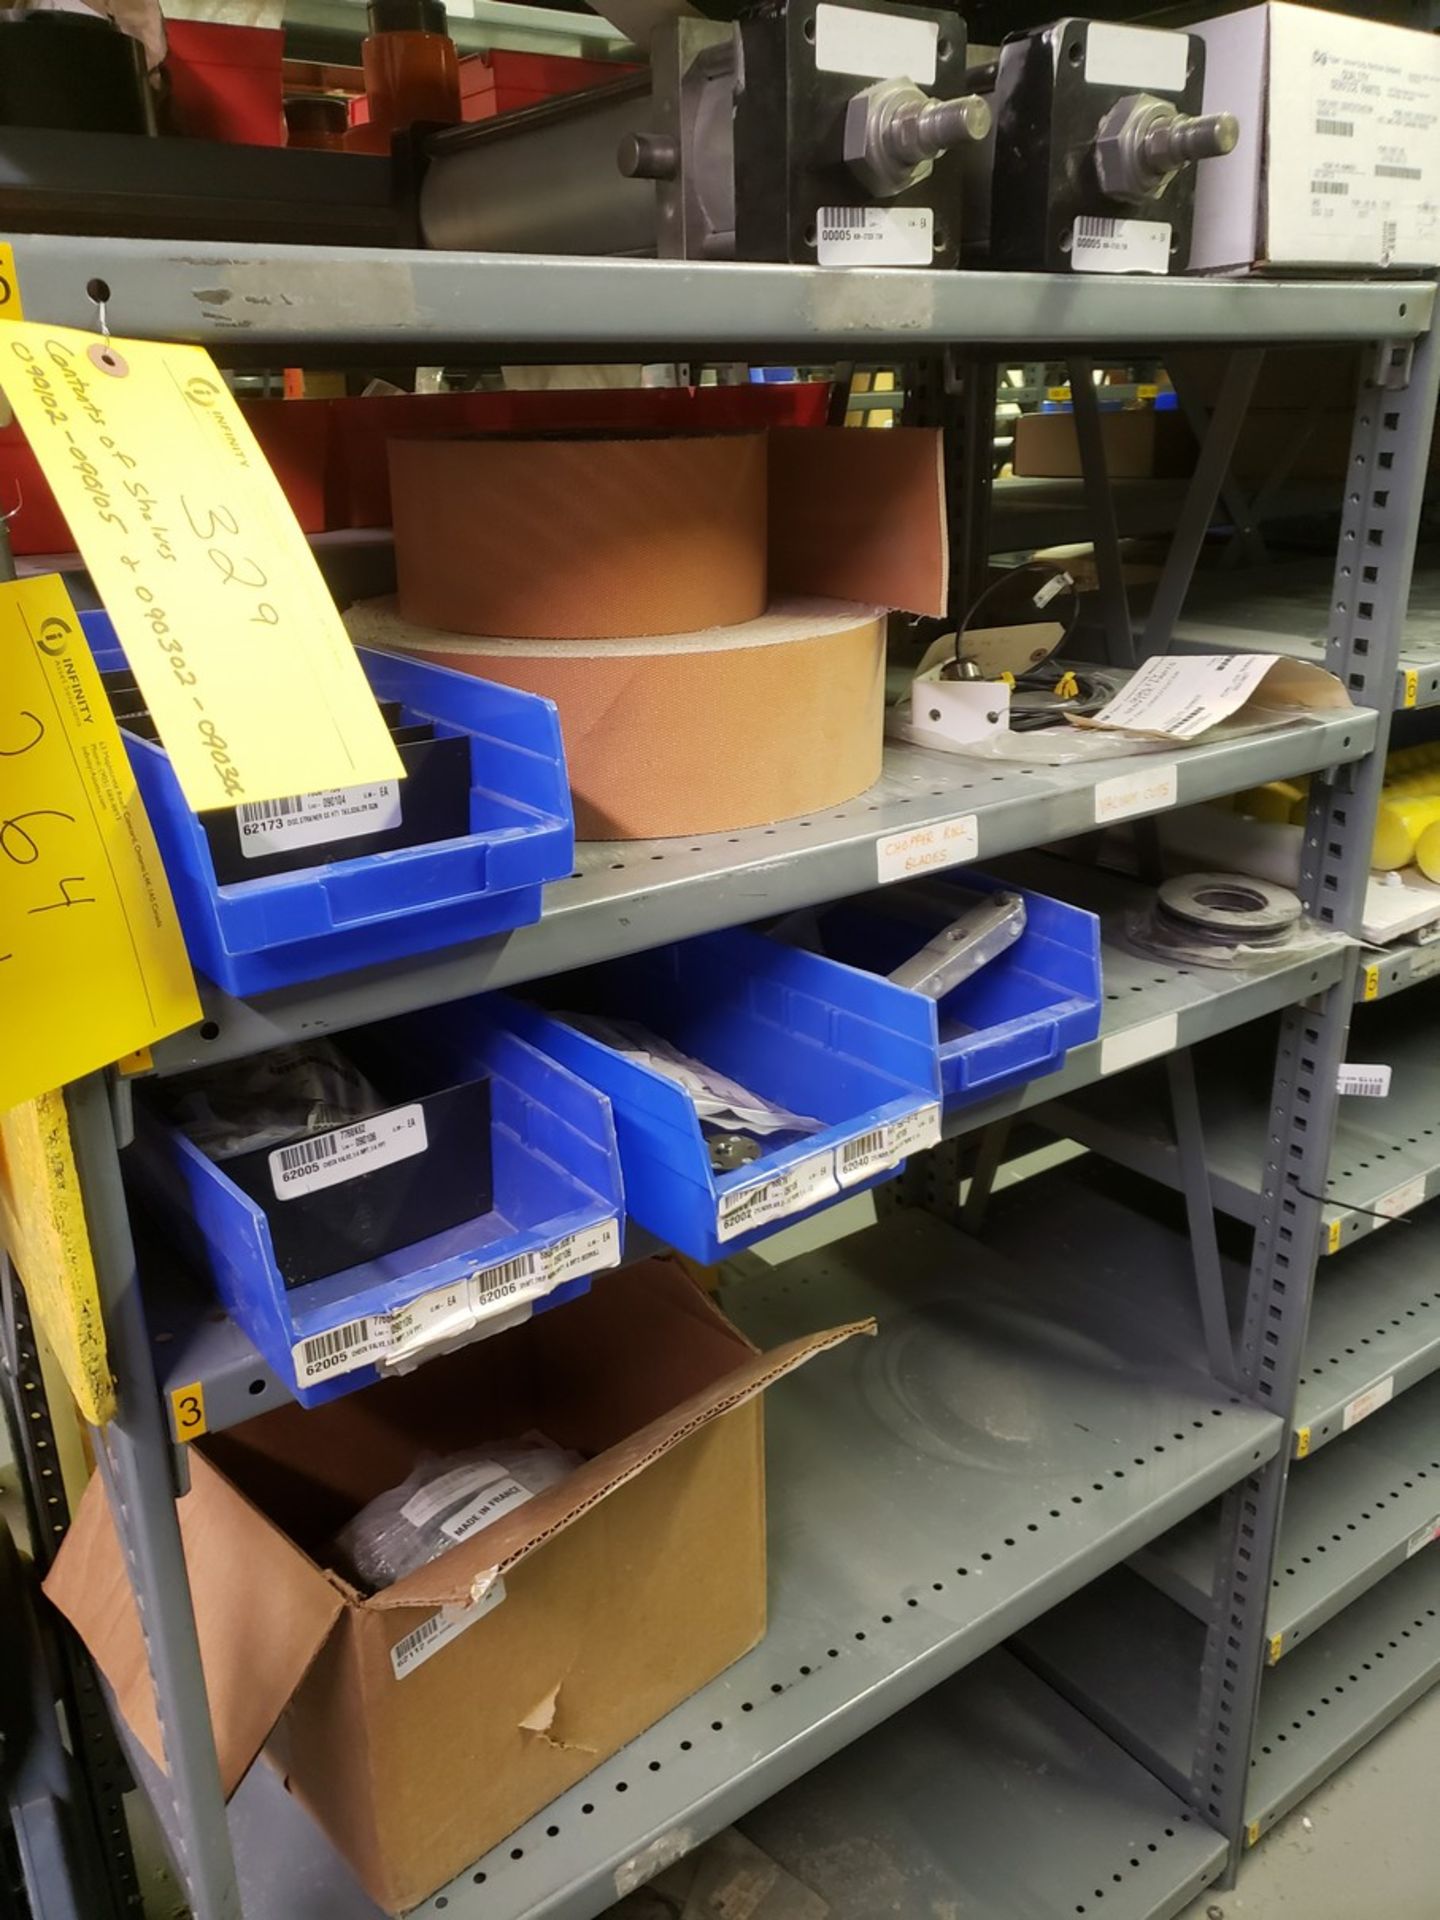 CONTENTS OF SHELVES ROW 9, RACK 1, SHELVES 2 - 5, AND ROW 9, RACK 3 SHELVES 2 - 6, PCMC WINDER PARTS